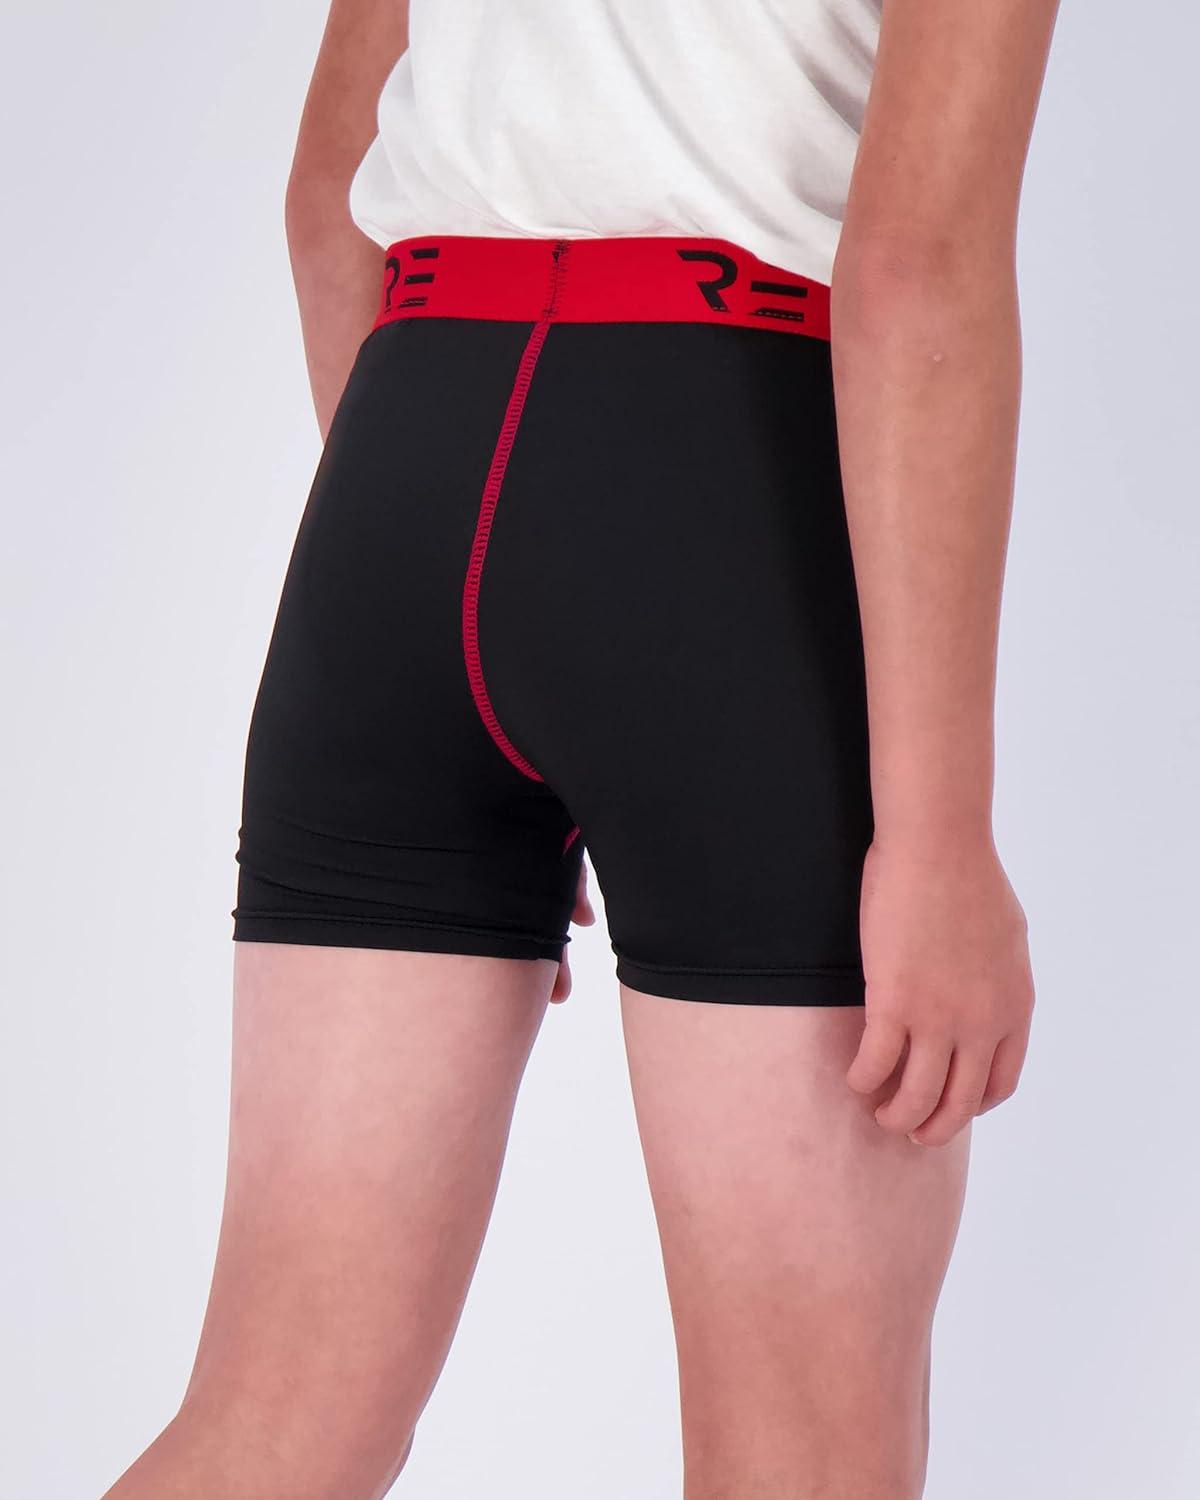 Real Essentials 5 Pack: Youth Boys' Compression Shorts